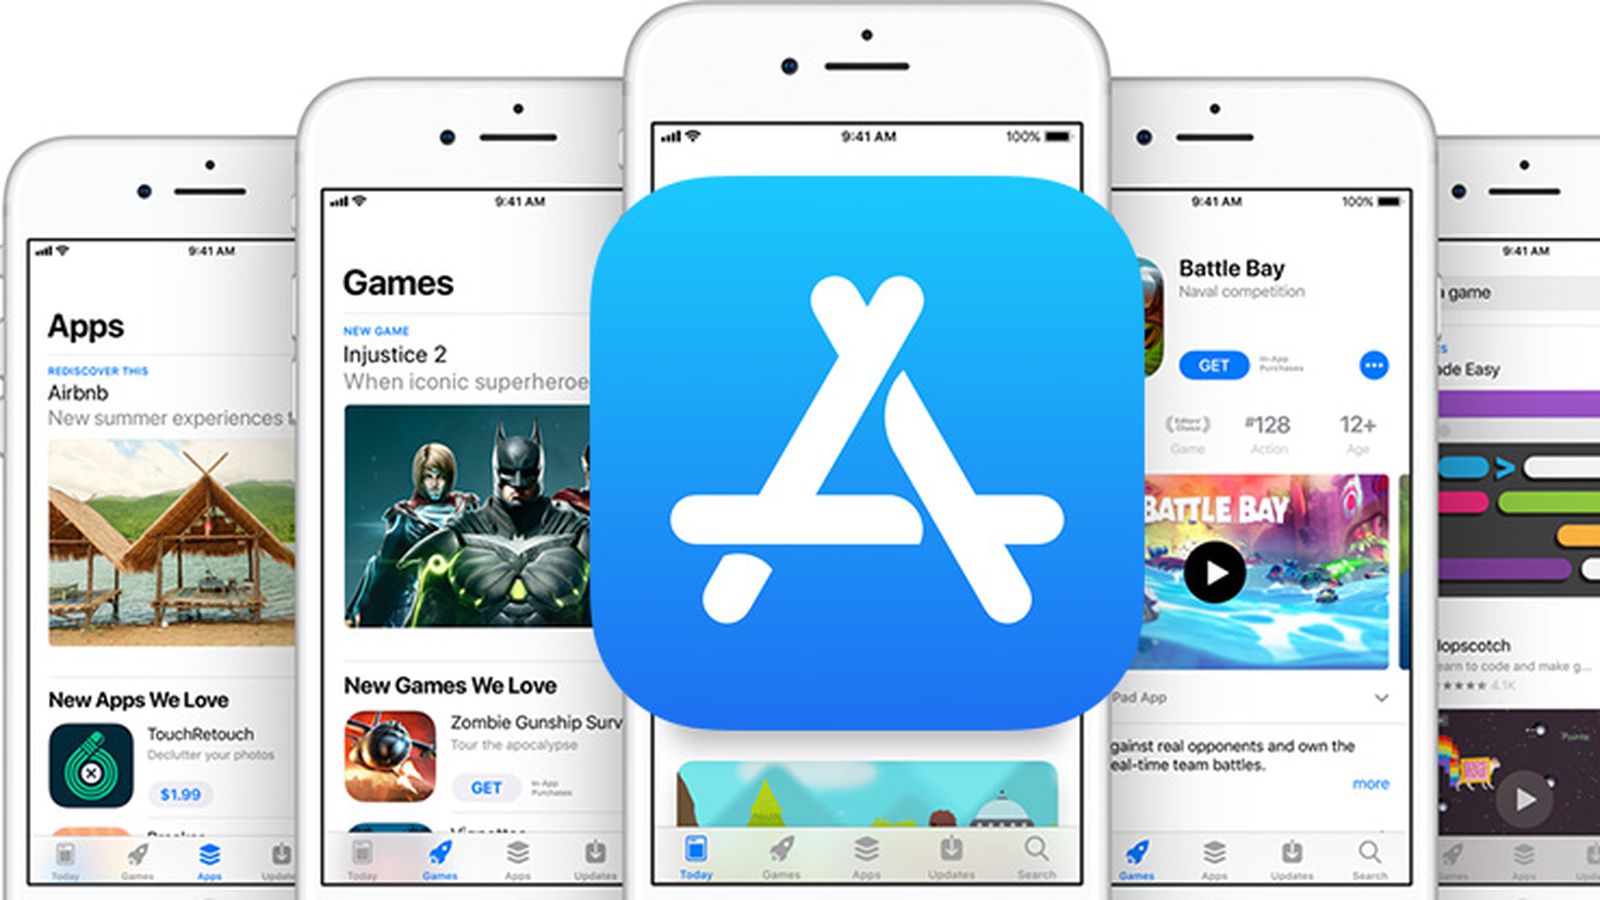 WSJ: Apple Apps Unfairly Dominate App Store Search Results - MacRumors